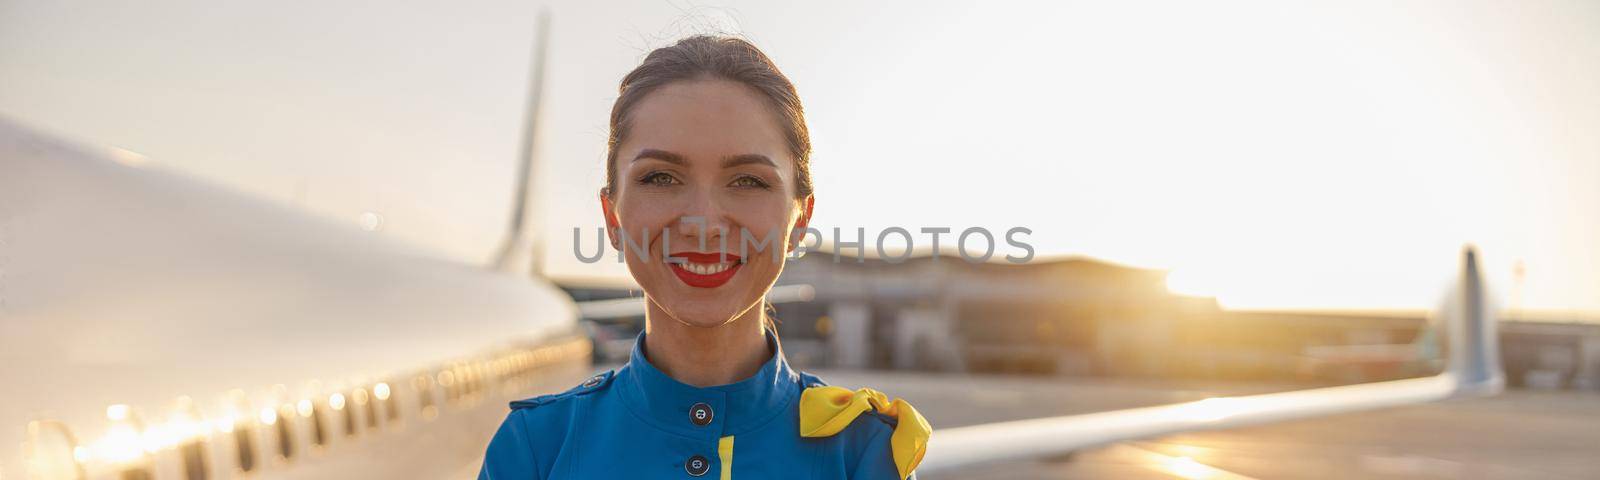 Portrait of beautiful air stewardess with red lips in blue uniform smiling at camera, posing outdoors with commercial airplane near the terminal in an airport in the background. Aircrew concept